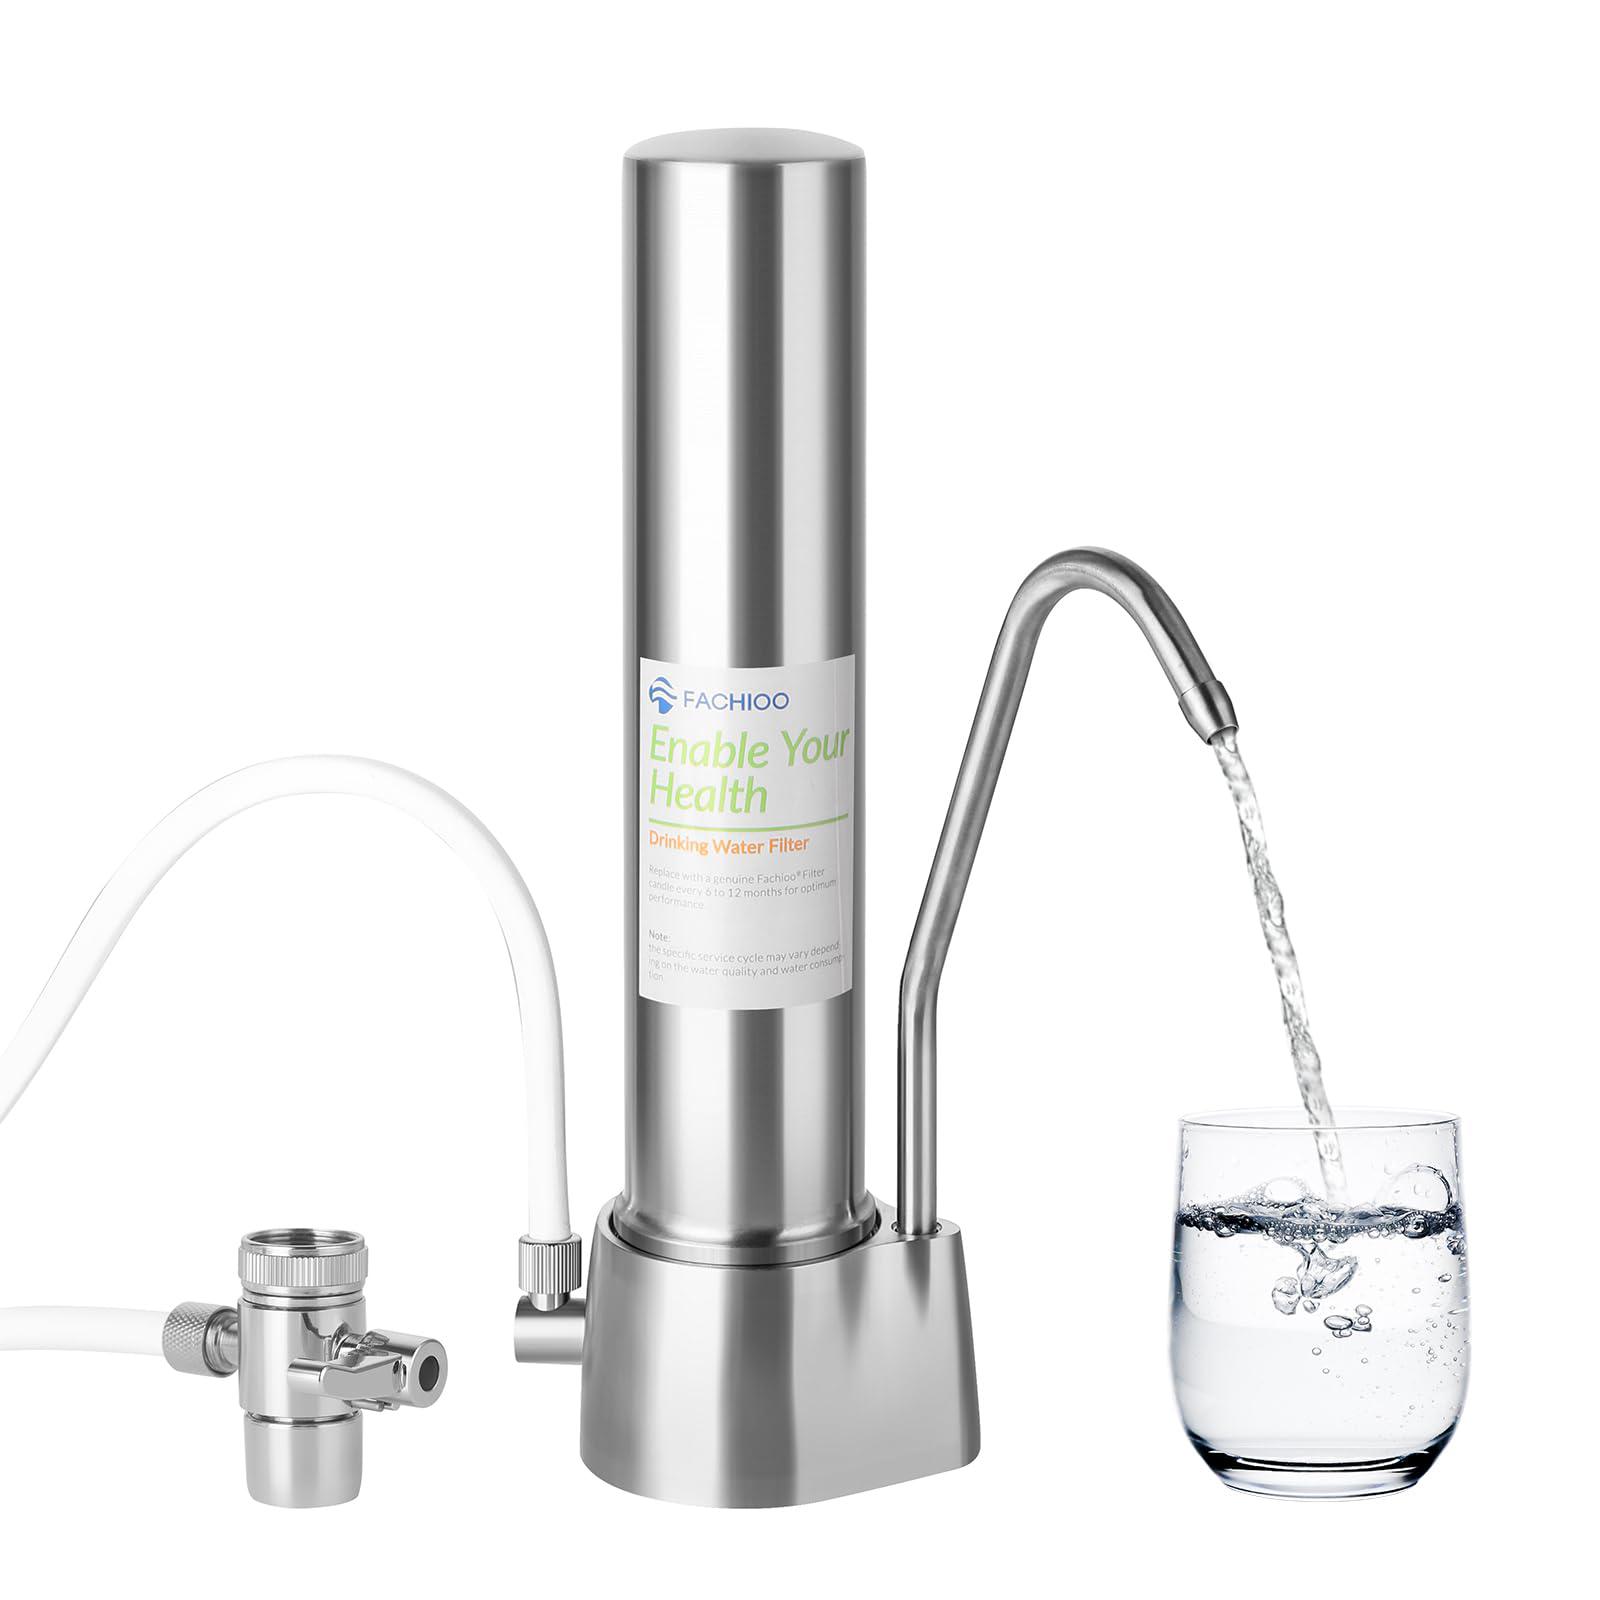 fachioo countertop water filter,8000 gallons stainless steel water filtration system with washable ceramic filter,nsf/ansi 42